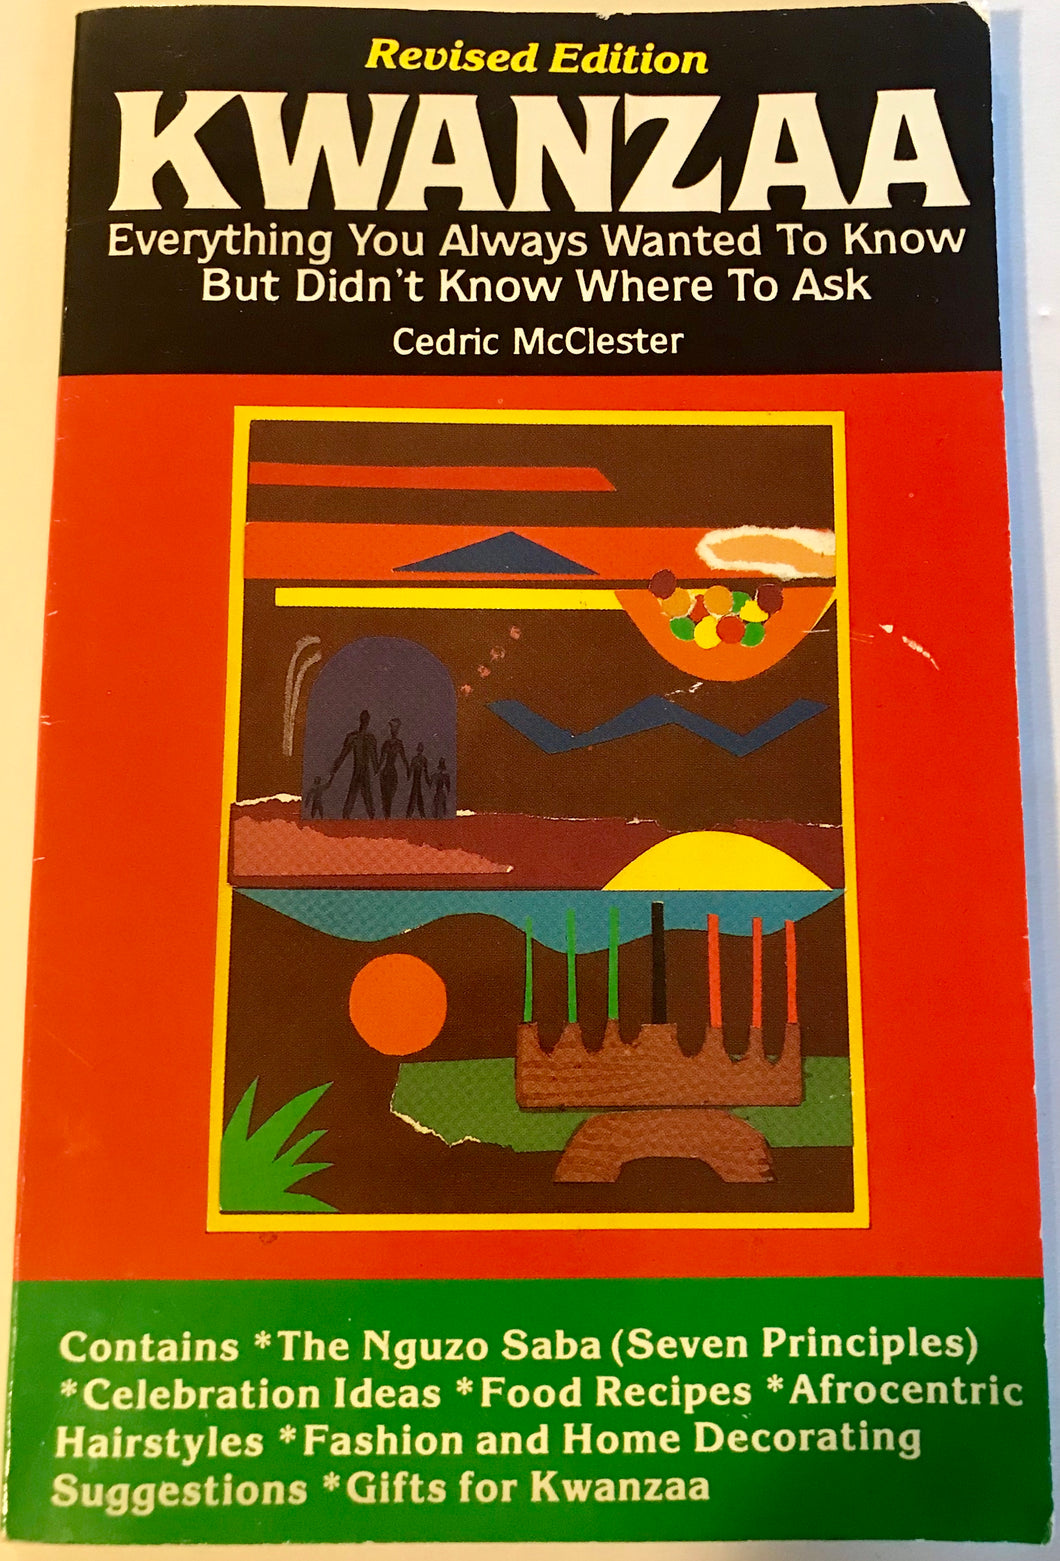 Kwanzaa: Everything You Want To Know...by Cedric McClester